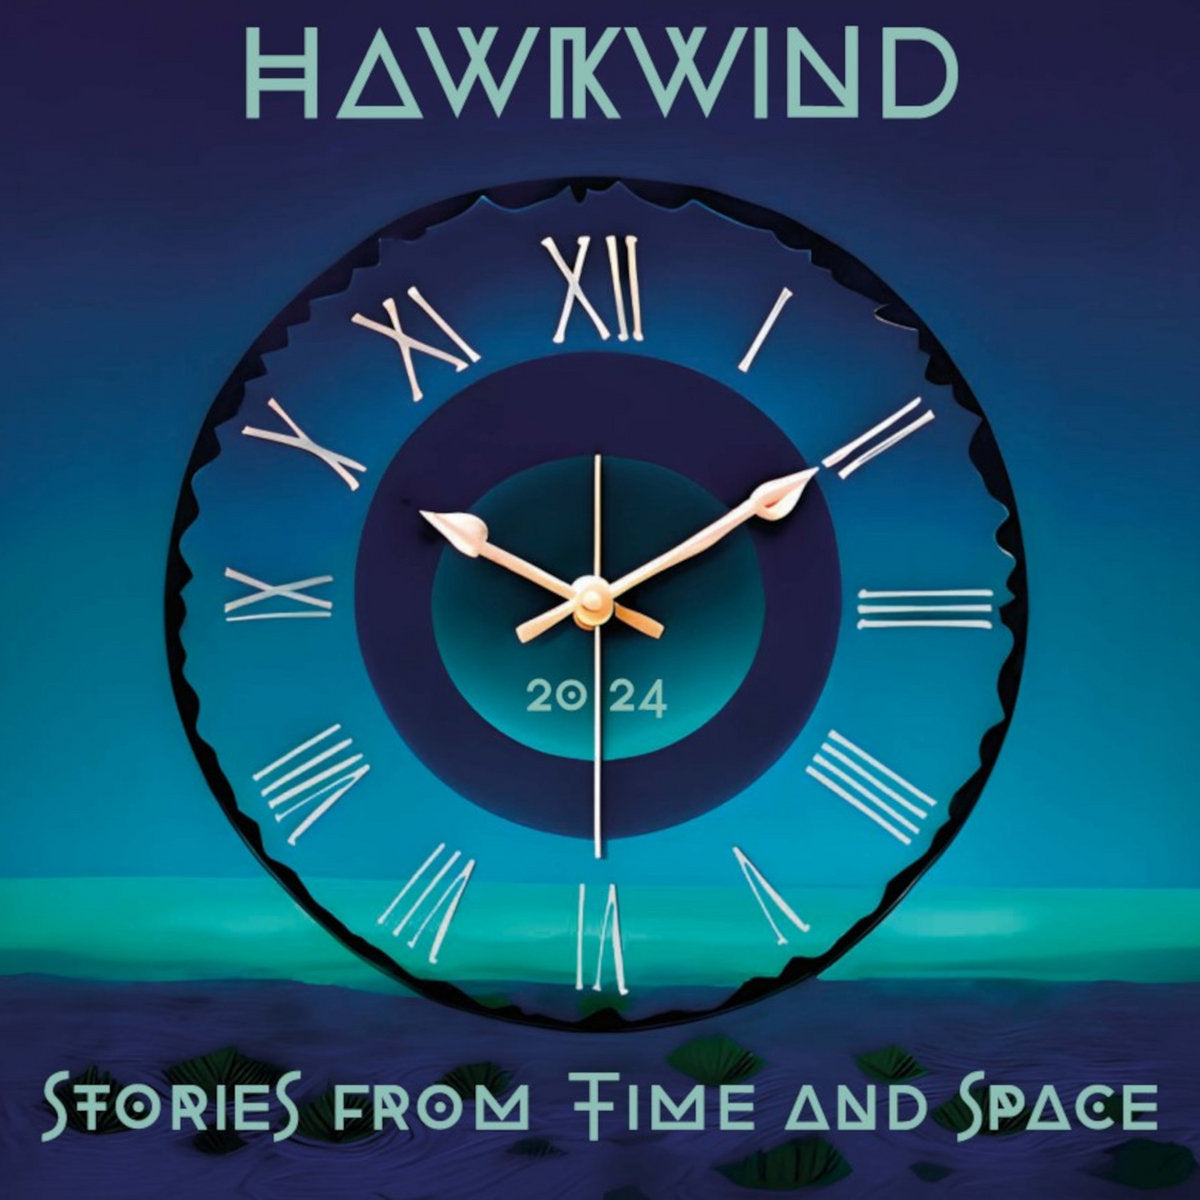 Hawkwind - Stories From Time And Space | Buy the Vinyl LP from Flying Nun Records 